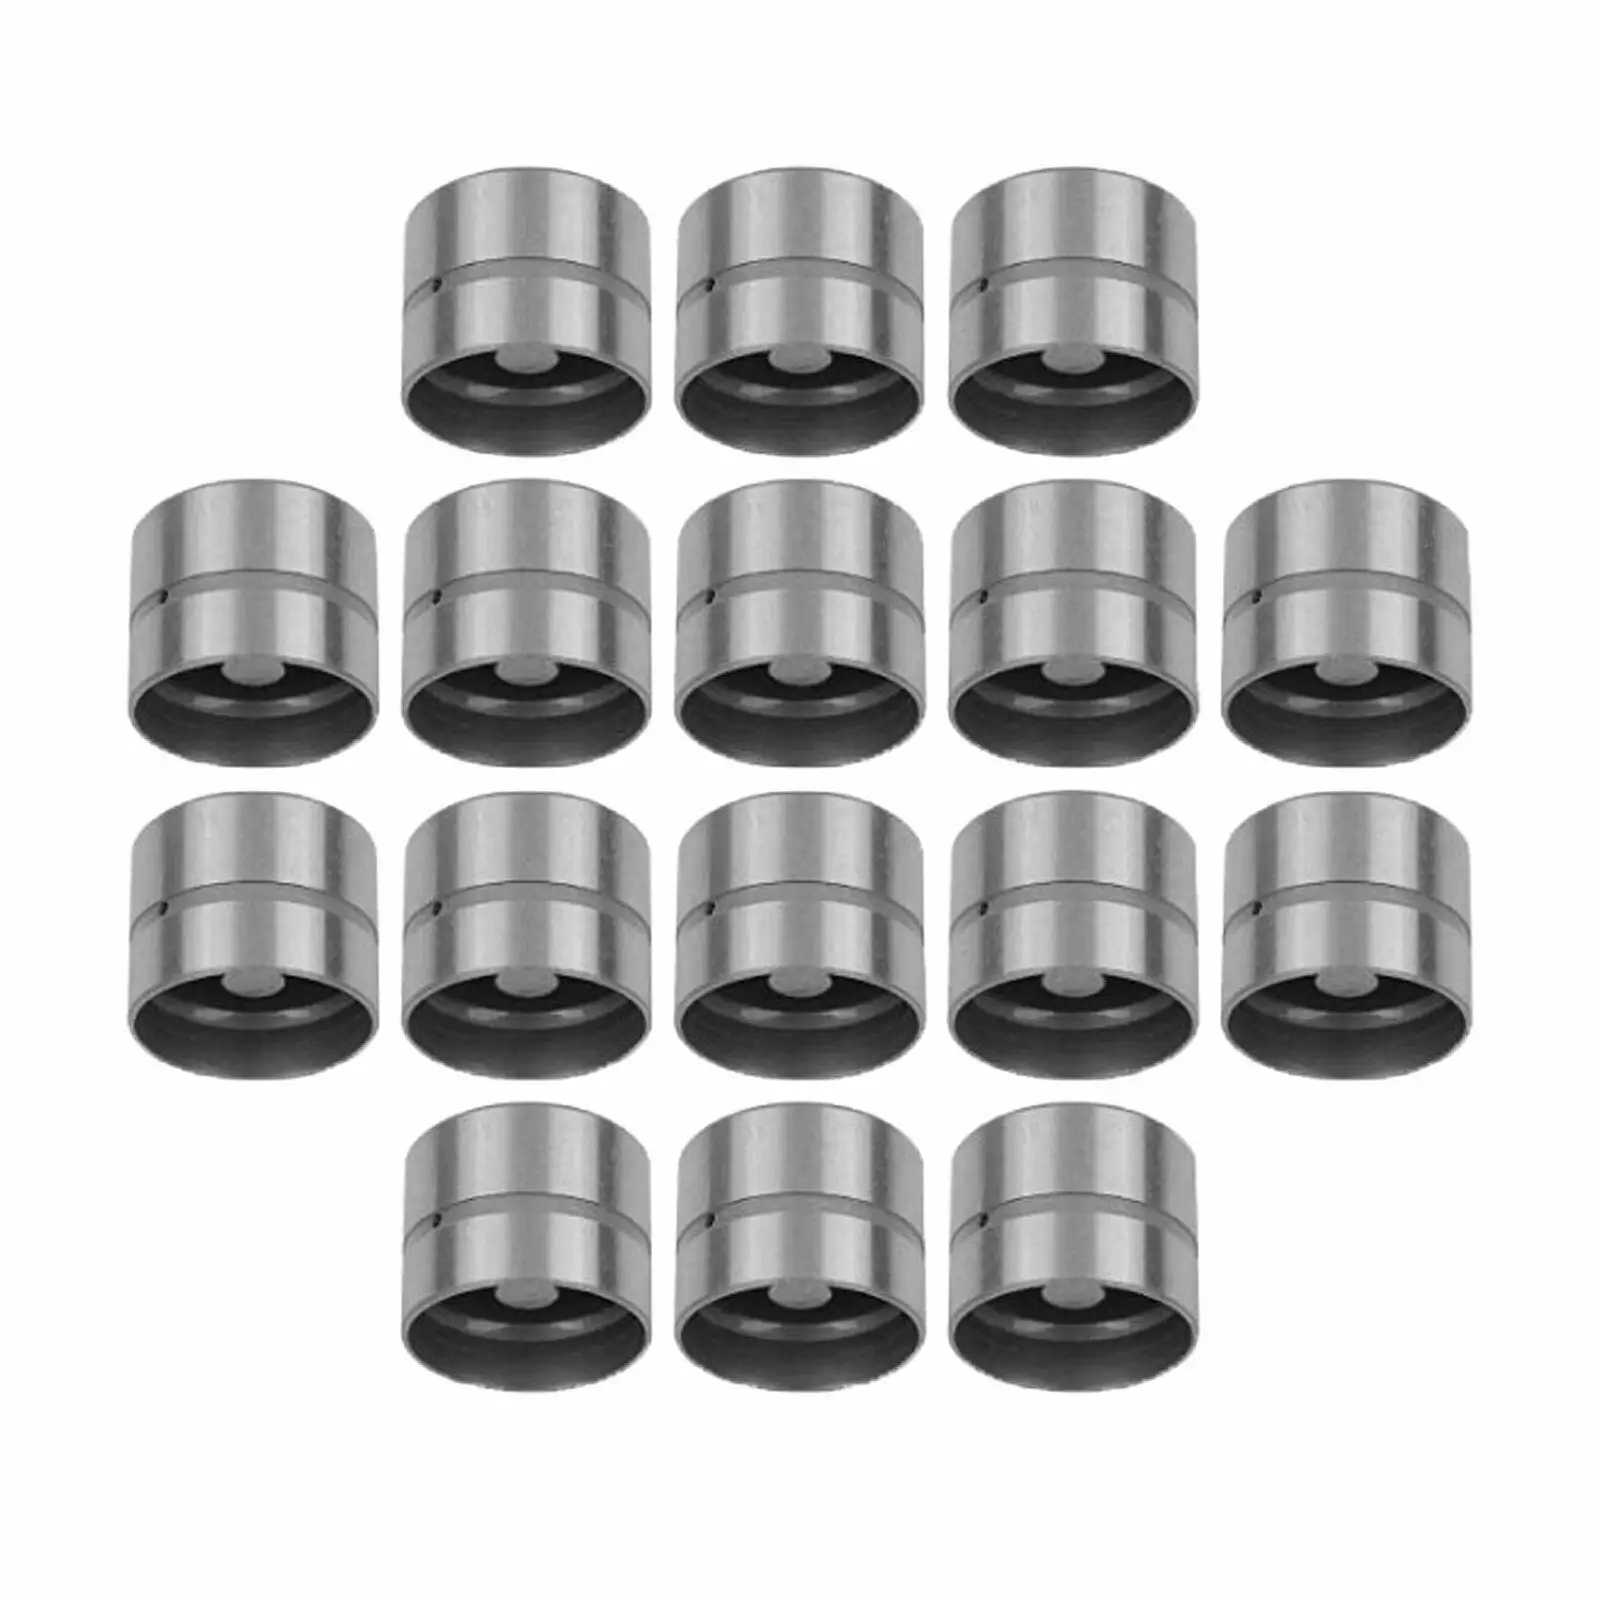 16x Hydraulic Lifters Tappets Accessories Valves Parts Repair for 20XE C20XE C20Let x20Xev 420011810 90570967 85000600